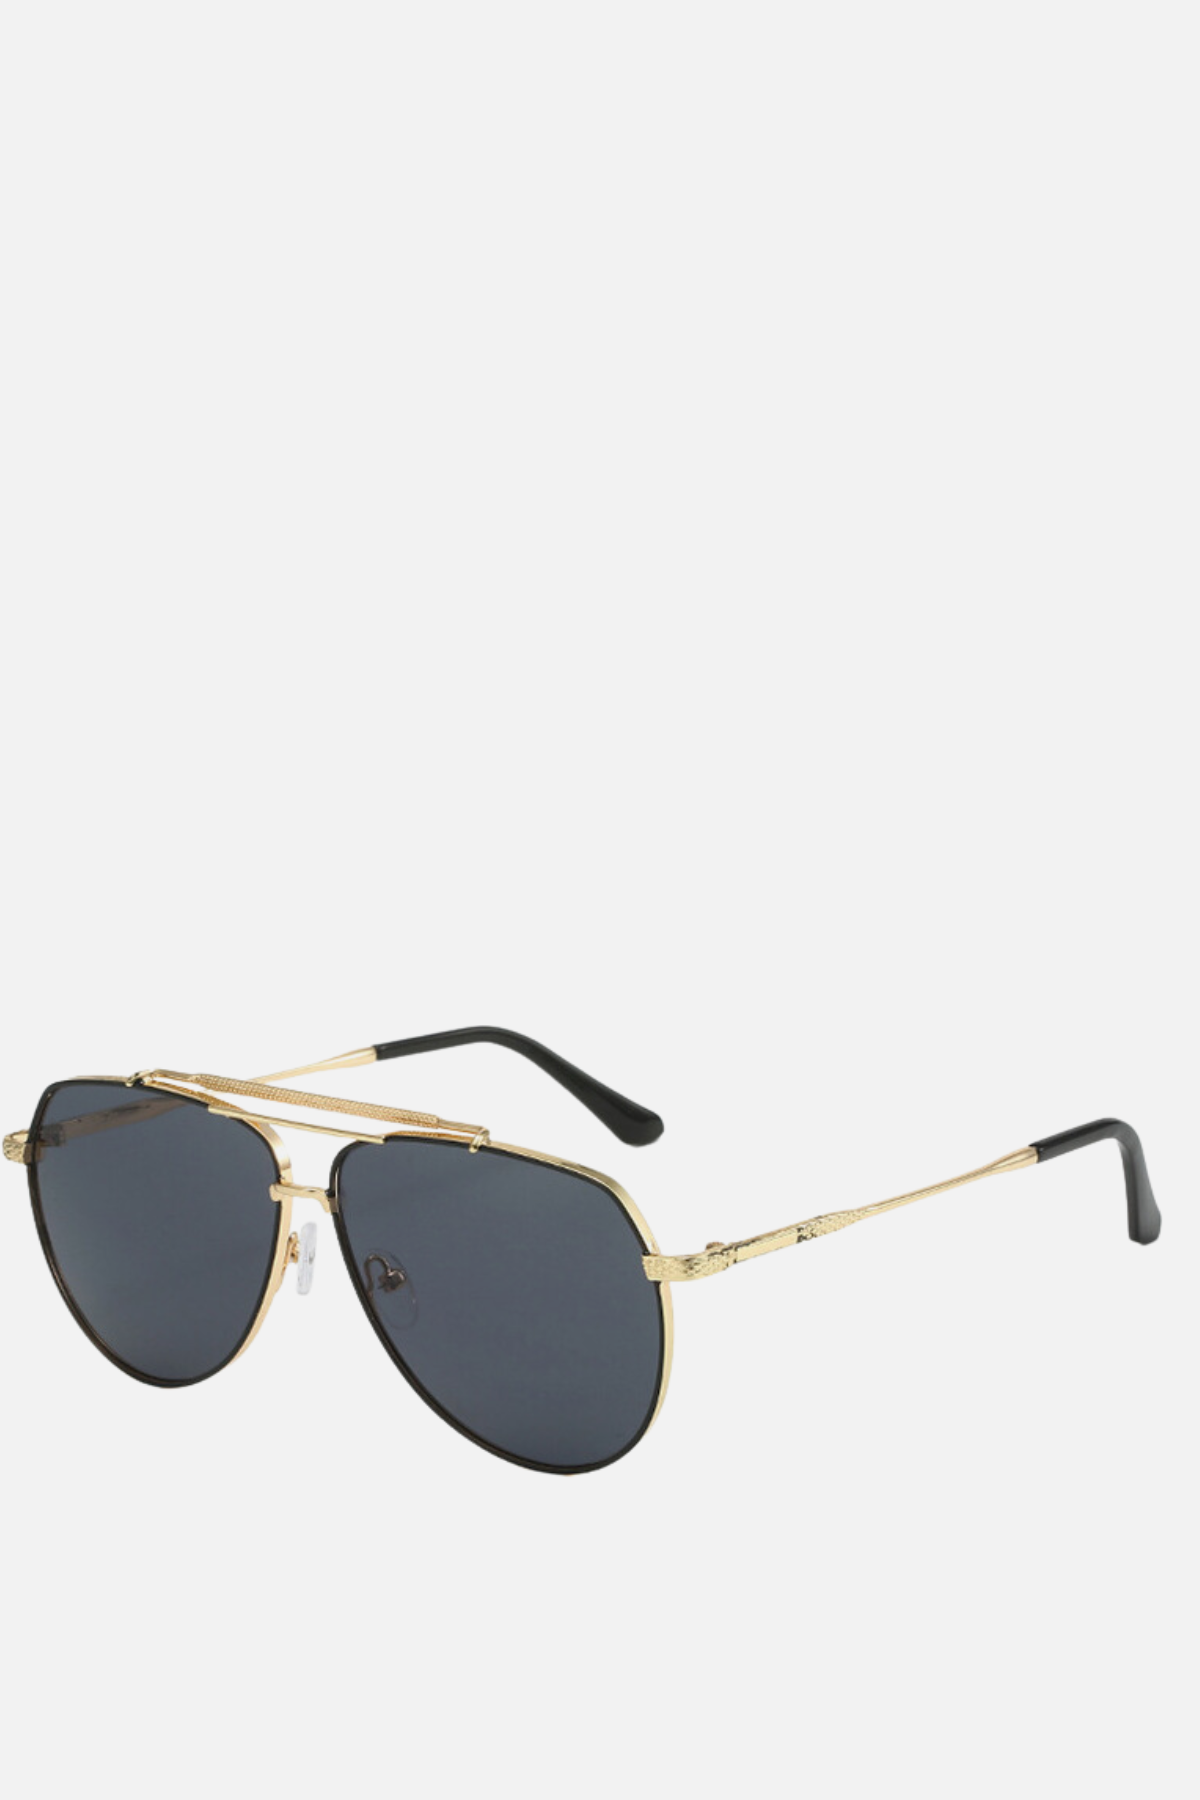 MOSCOW Black and Gold Aviators